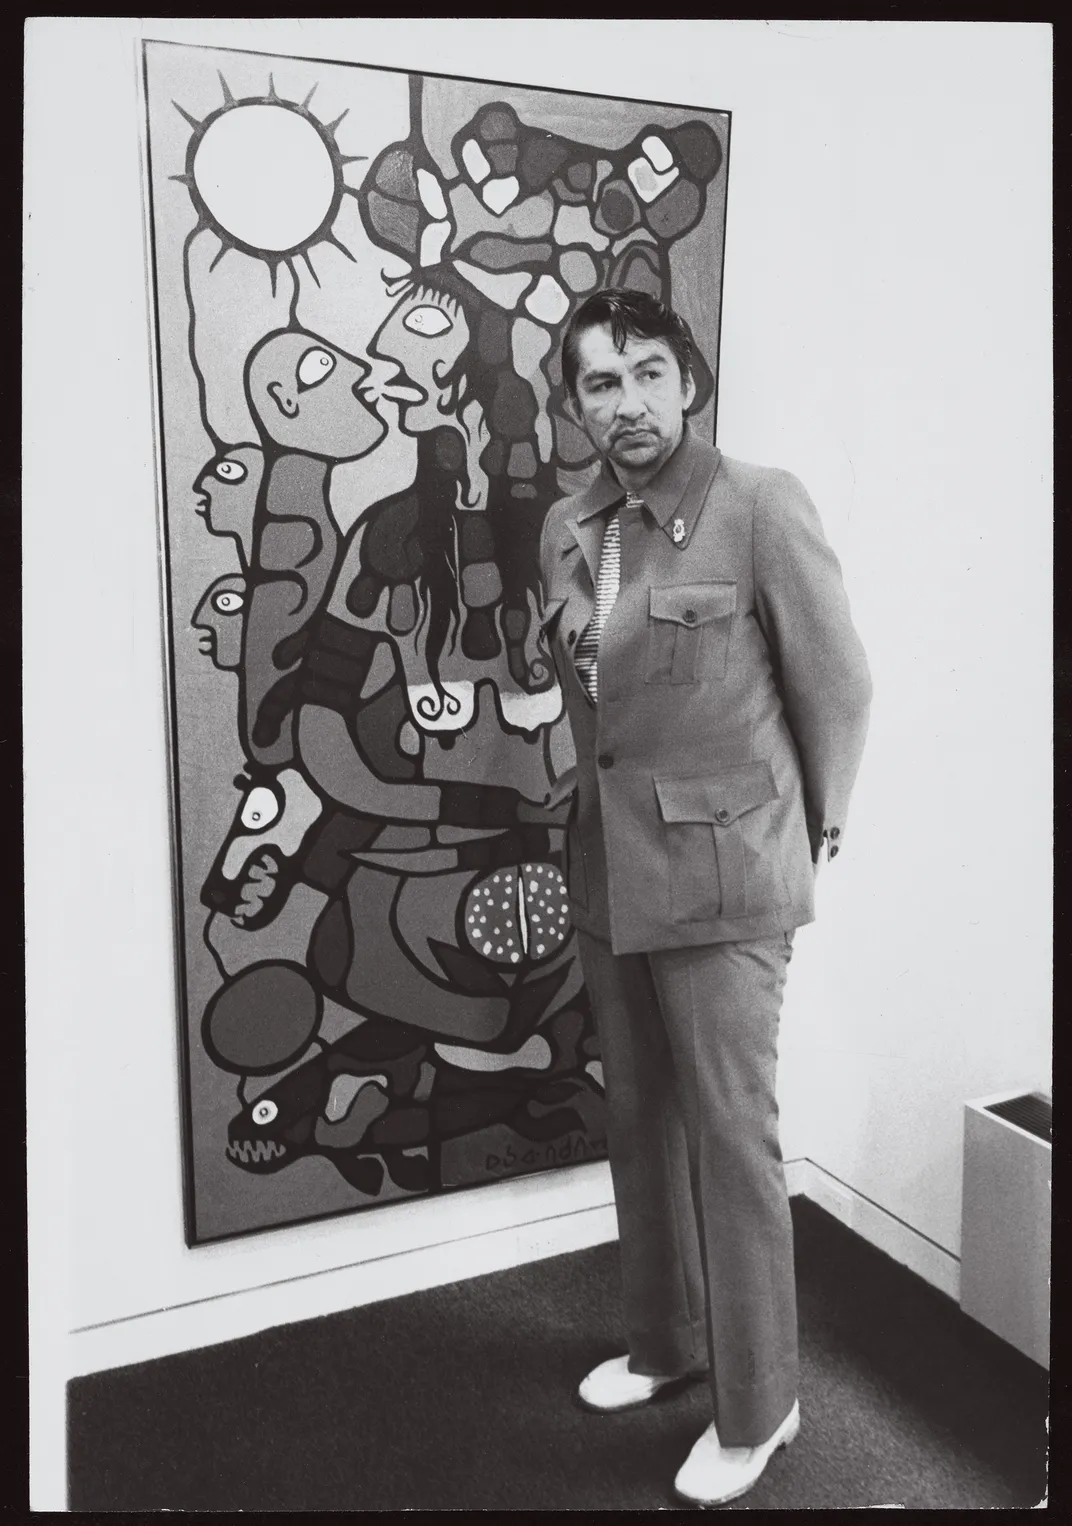 Morrisseau, known as the “Picasso of the North,” at the Pollock Gallery in Toronto, 1975, beside a painting of mother and child—a frequent theme.